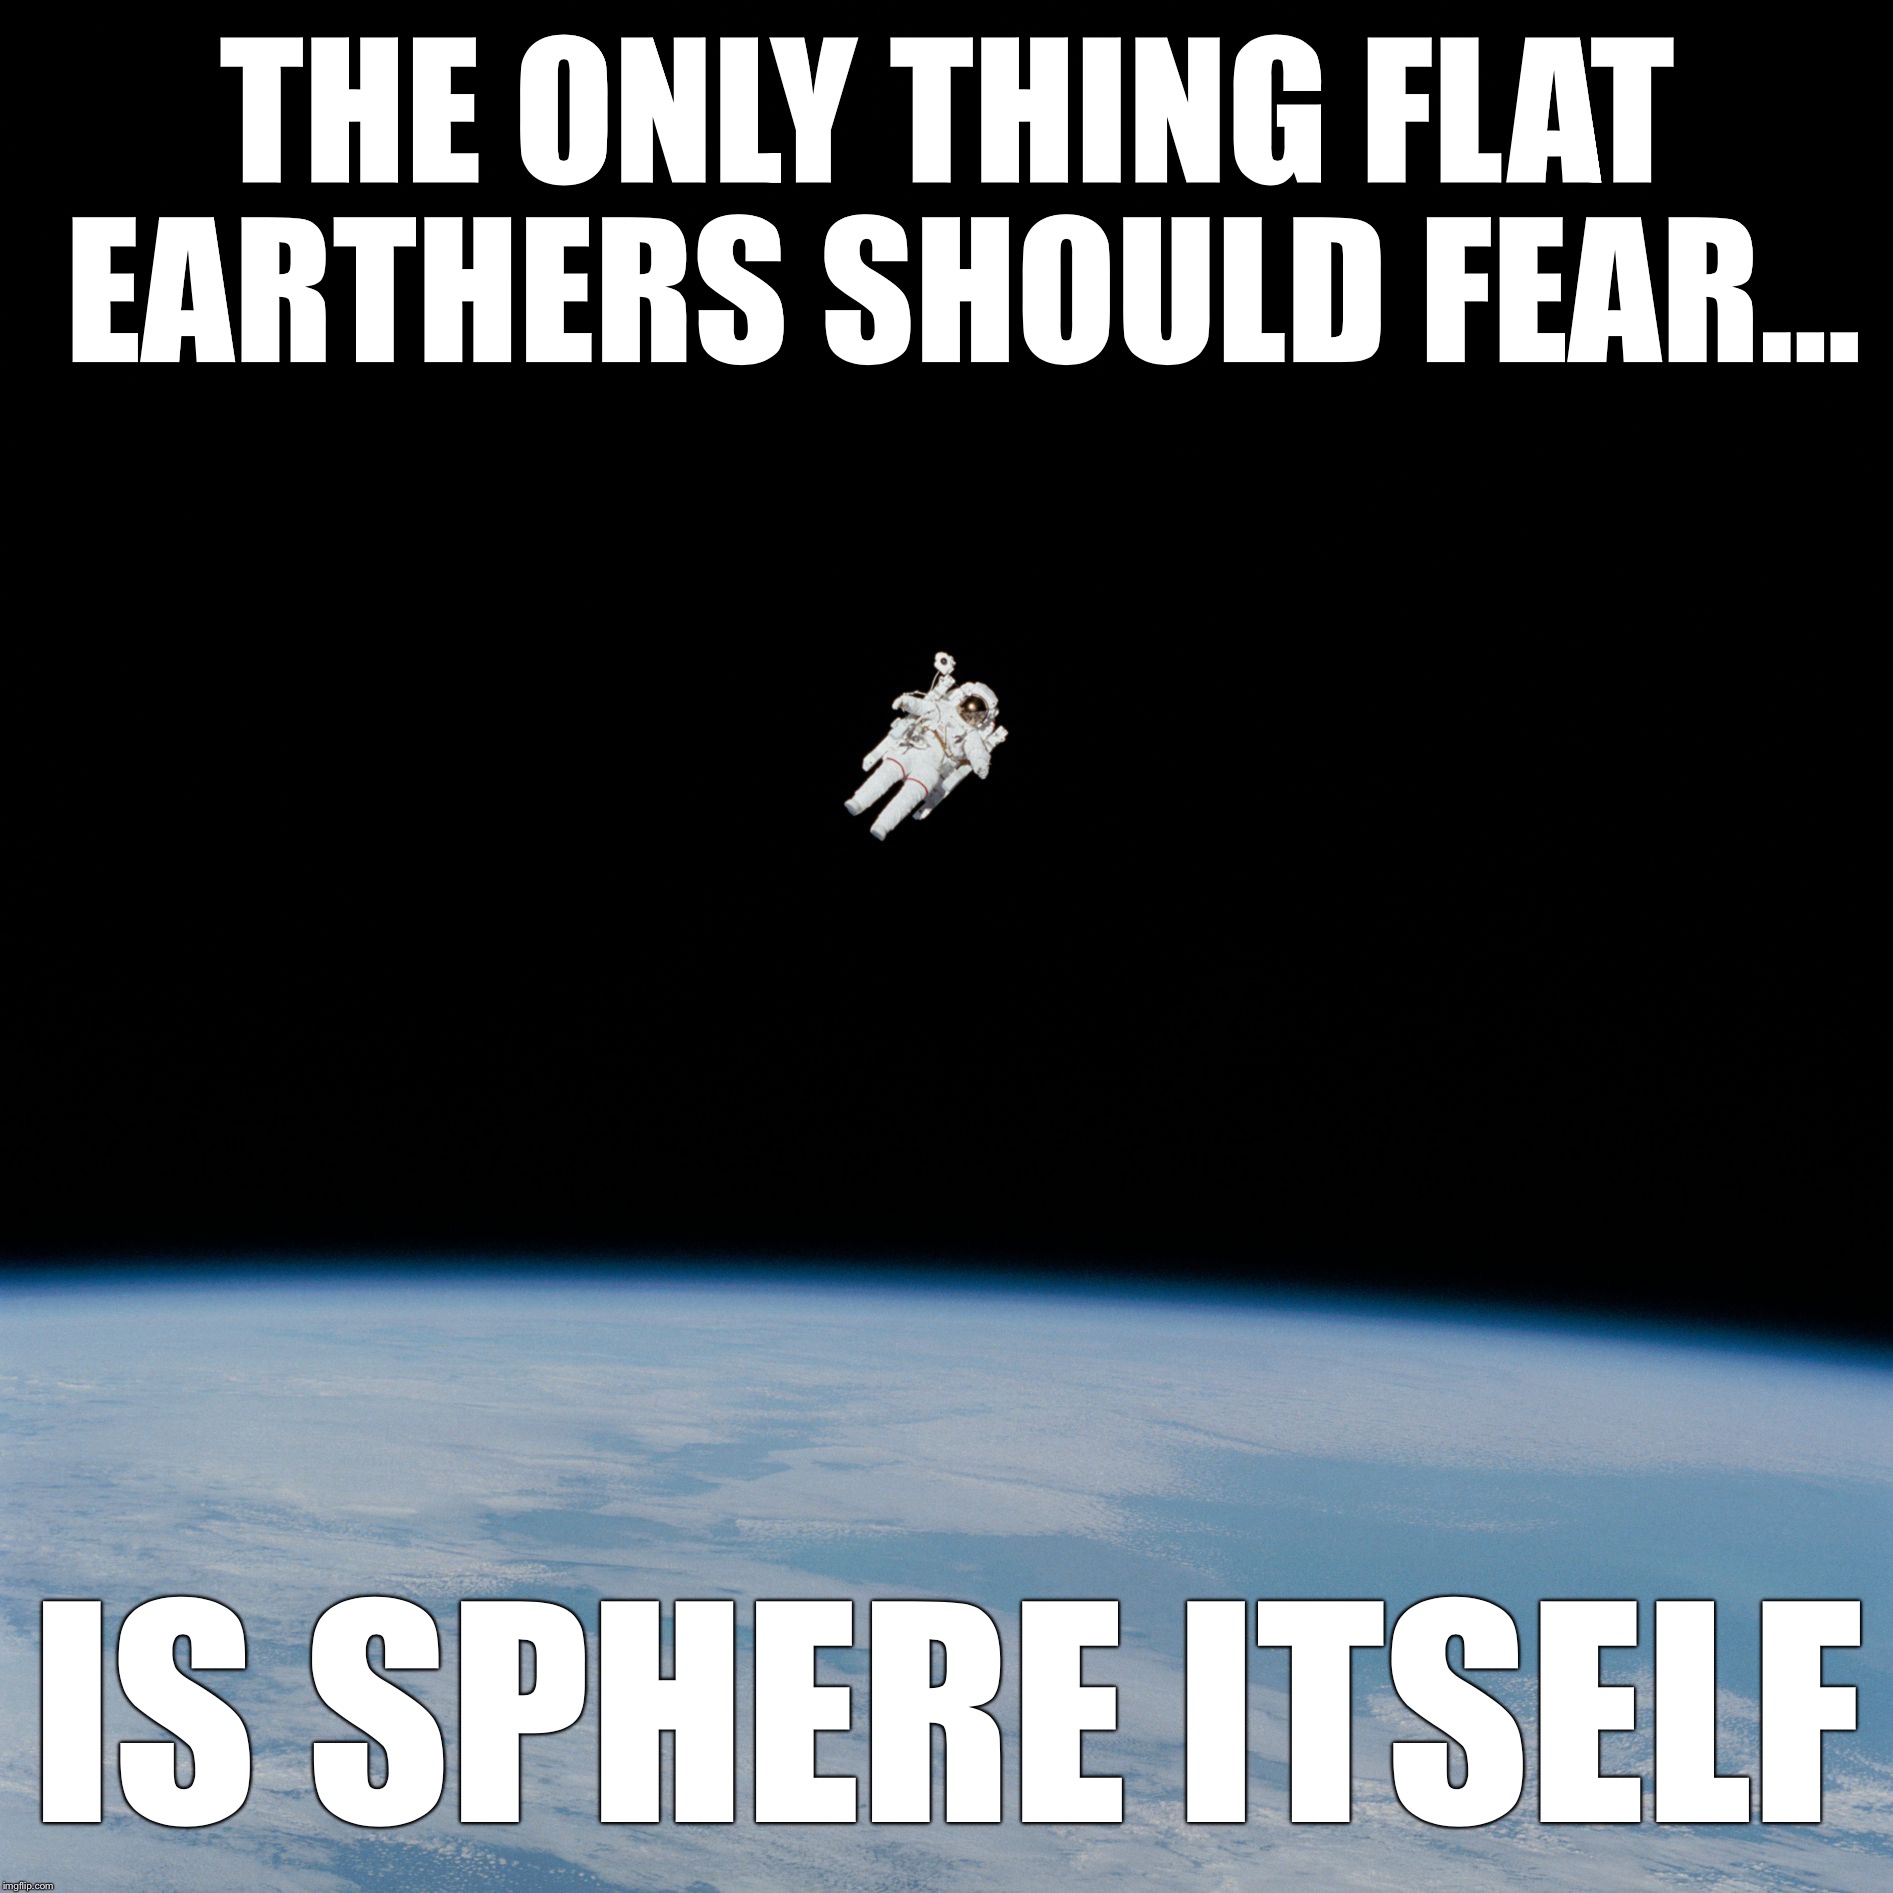 The only thing flat earthers should fear... |  THE ONLY THING FLAT EARTHERS SHOULD FEAR... IS SPHERE ITSELF | image tagged in nasa flat earth space station iss,flat earth,fear | made w/ Imgflip meme maker